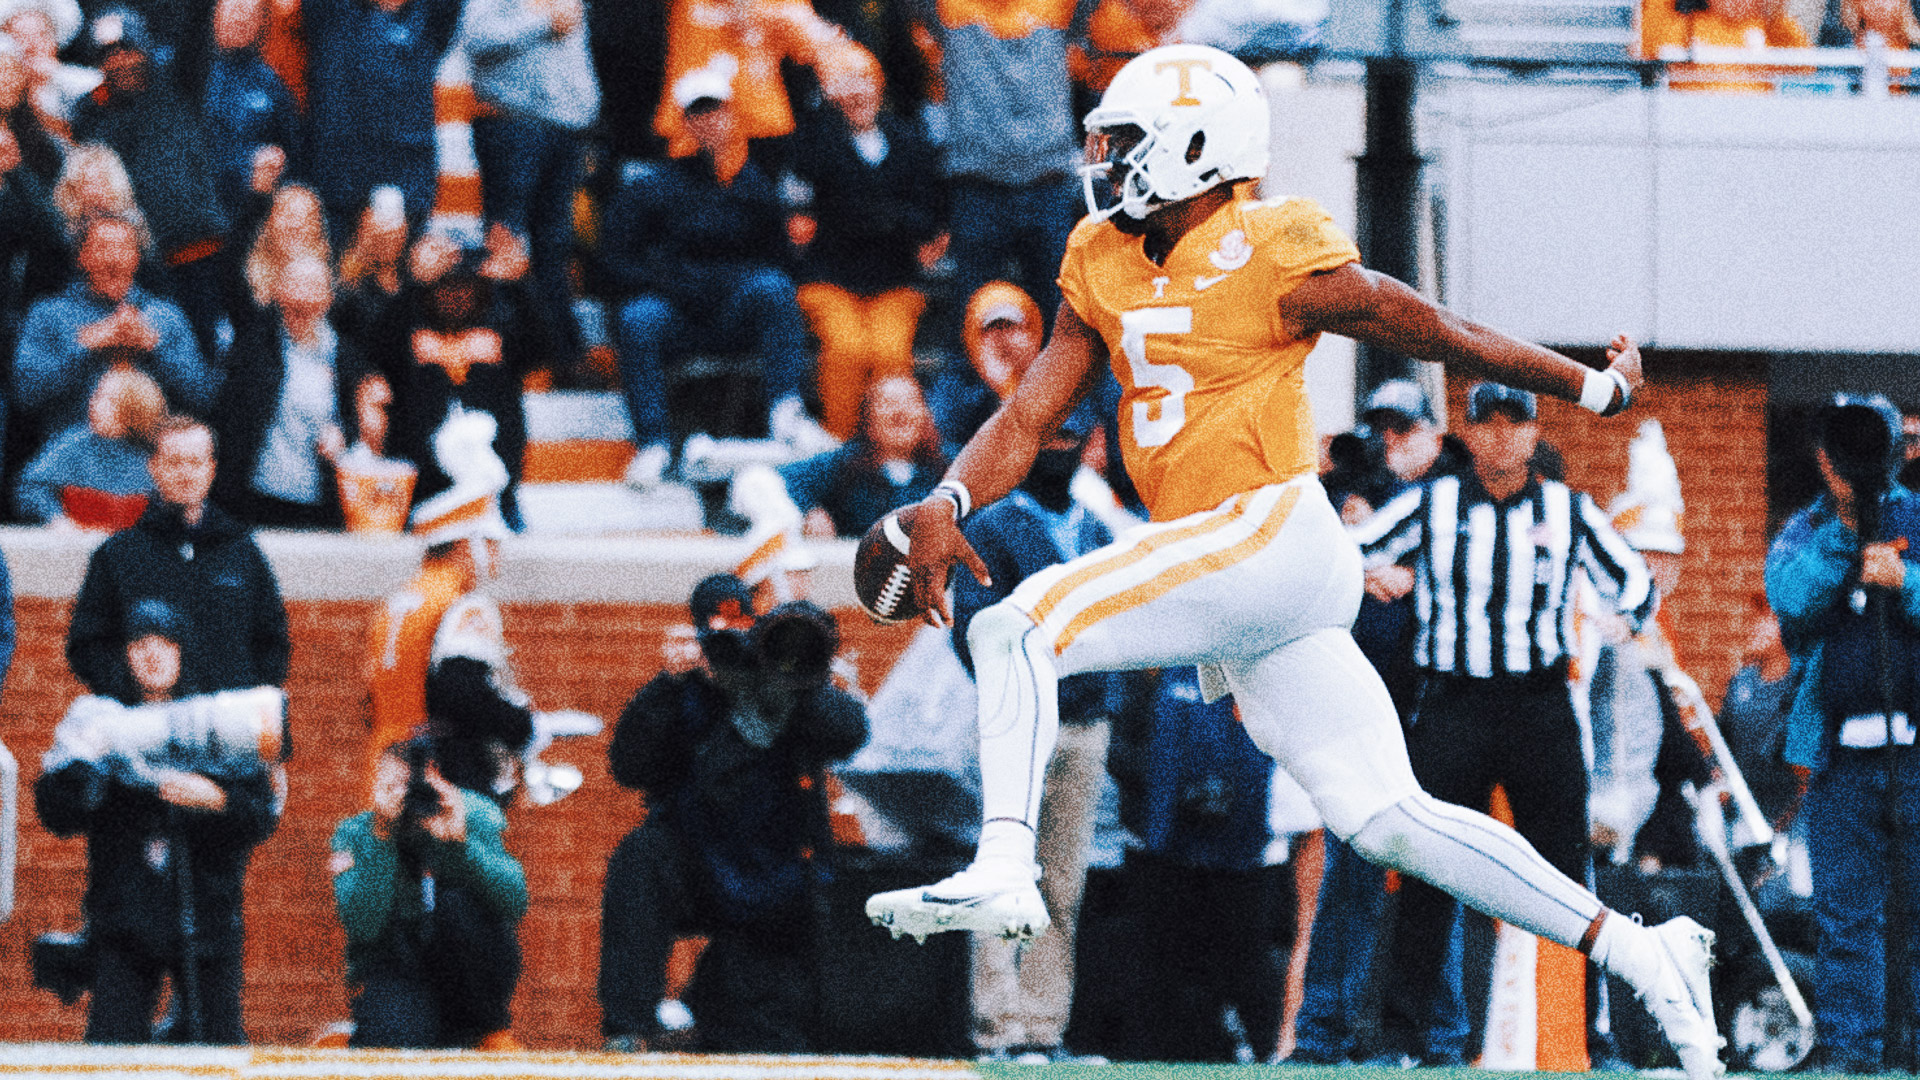 2023 NFL Draft odds: Where will Tennessee's Hendon Hooker get selected?